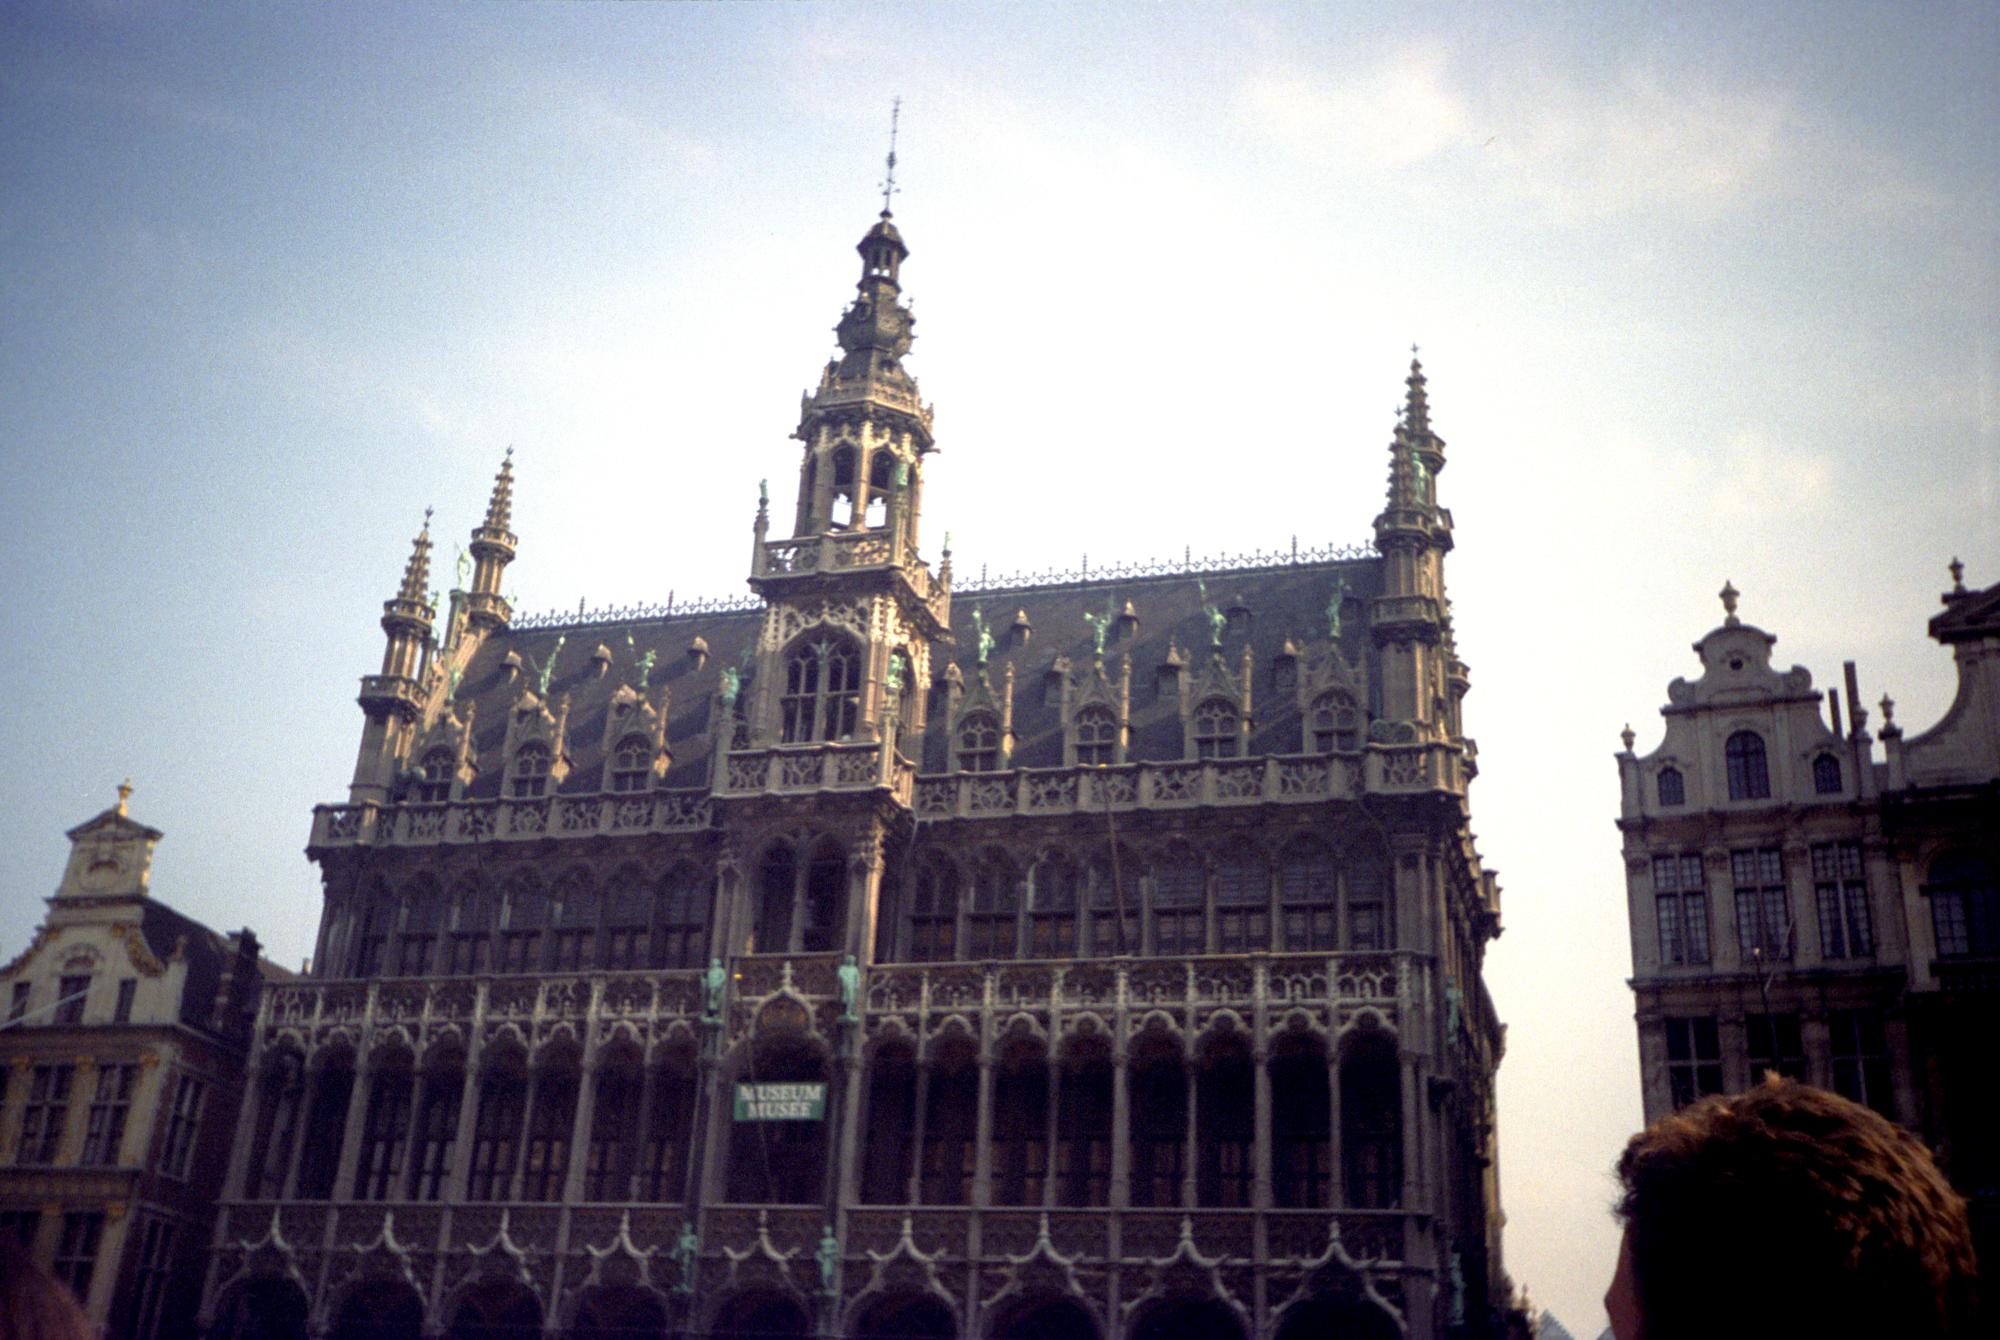 Benelux (Ana) - Brussels #4